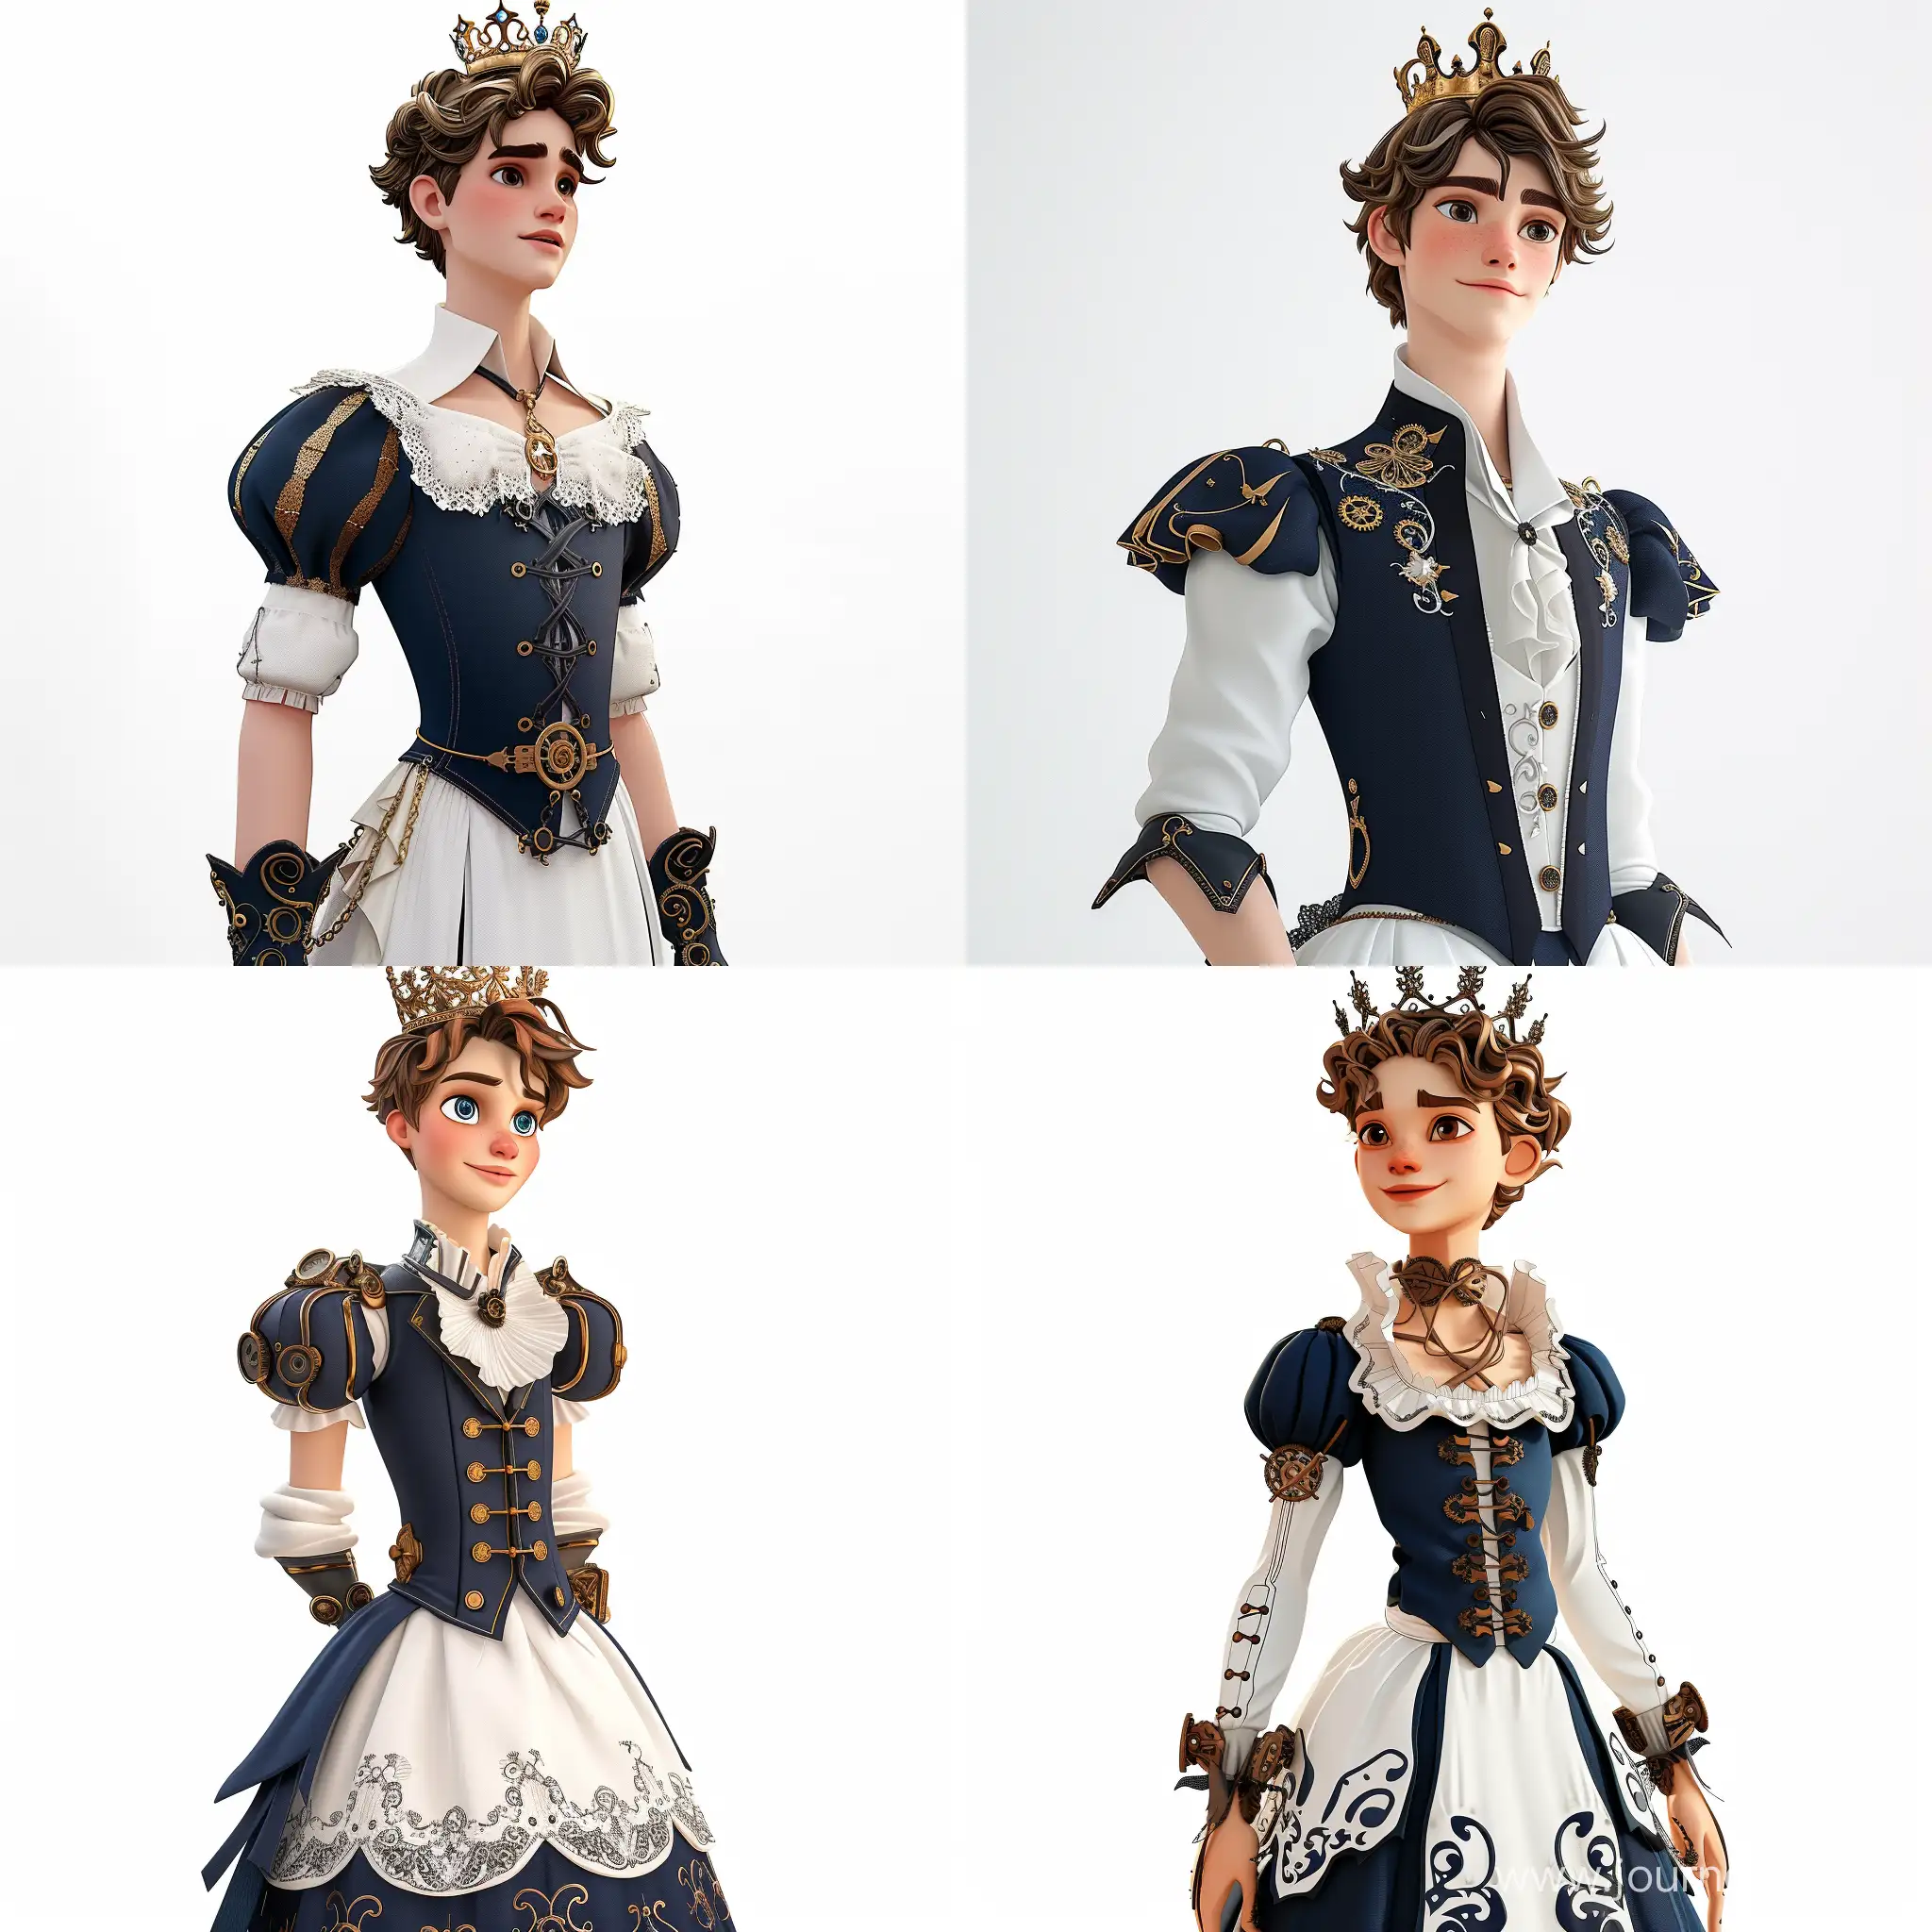 A Young Man with a Crown on his head, Navy Blue & White Dress Details, Steampunk Dress Style, White Background, Vectorize, Blender Software, 3d Cartoonic Character Design, Disney Studio Style, High Precision 